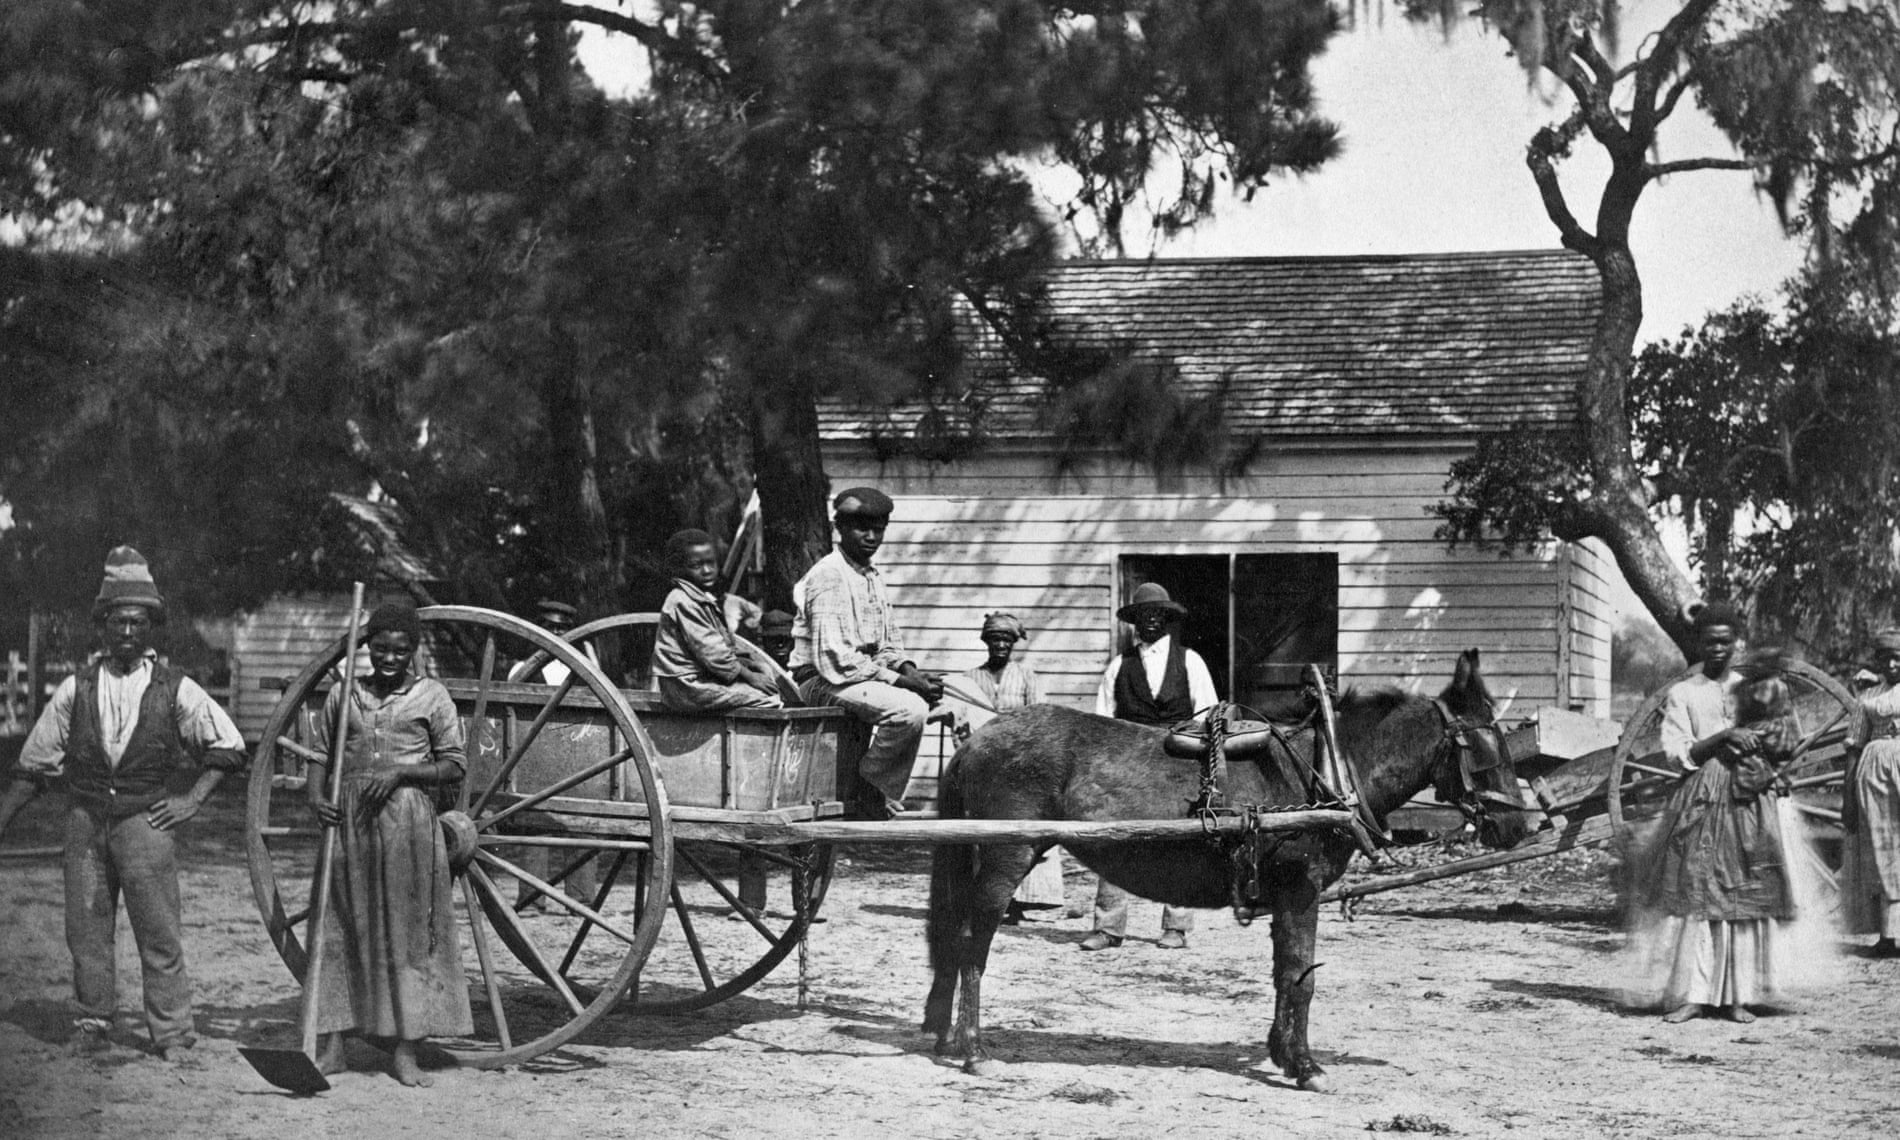 A photo showing a group of African American slaves at the Cassina Point plantation of James Hopkinson on Edisto Island, South Carolina.